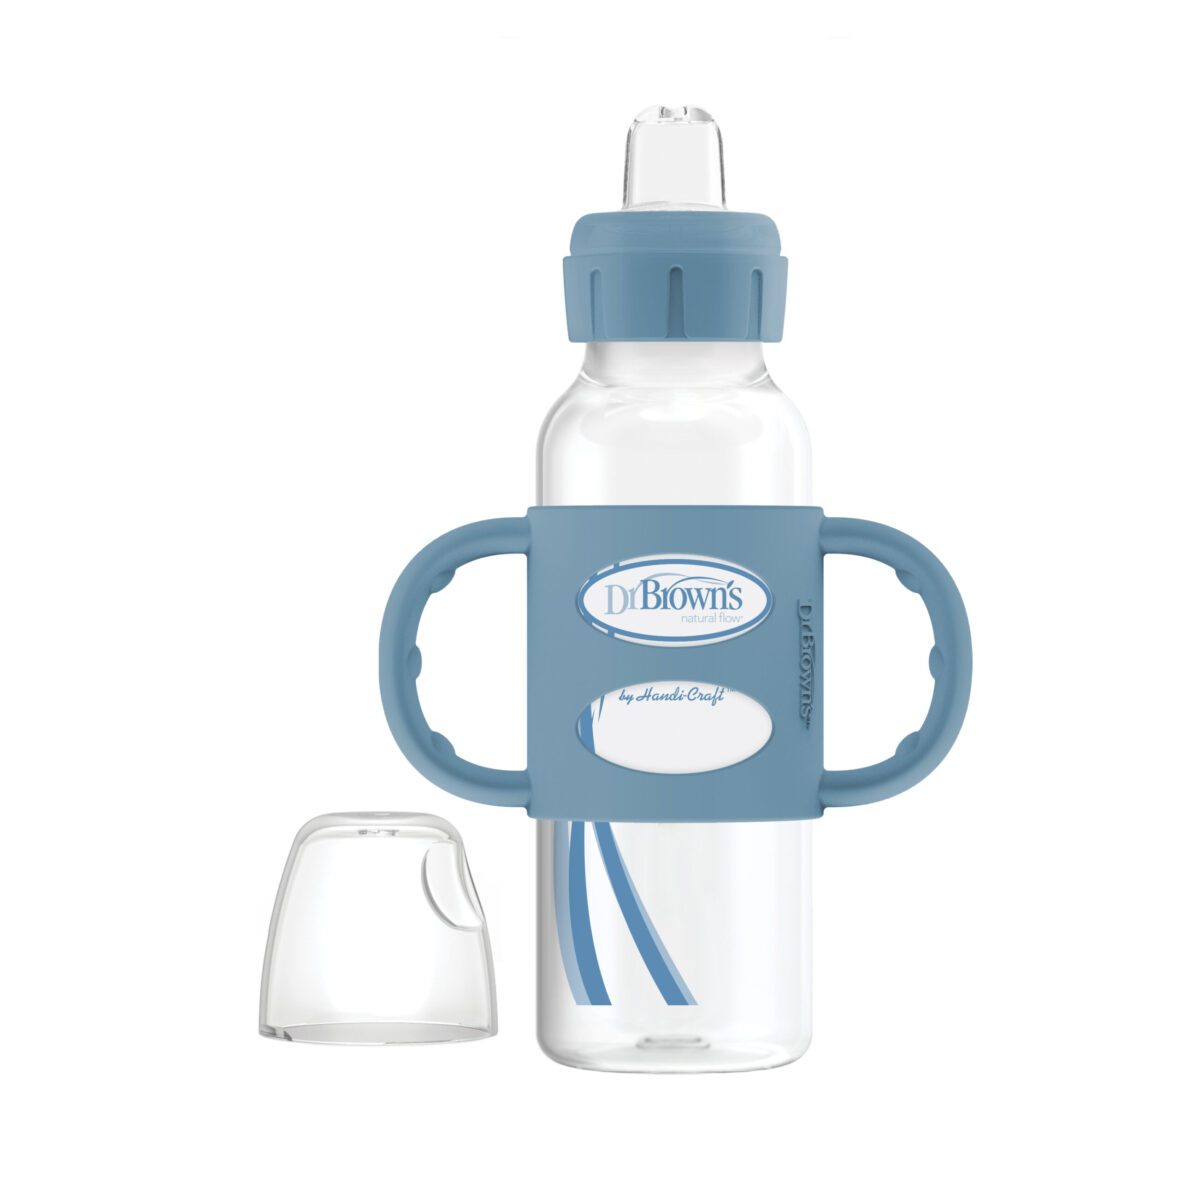 SB81071_Product_Narrow_Sippy_Bottle_with_Silicone_Handles_8oz_250mL_Light_Blue_1-Pack-1-scaled